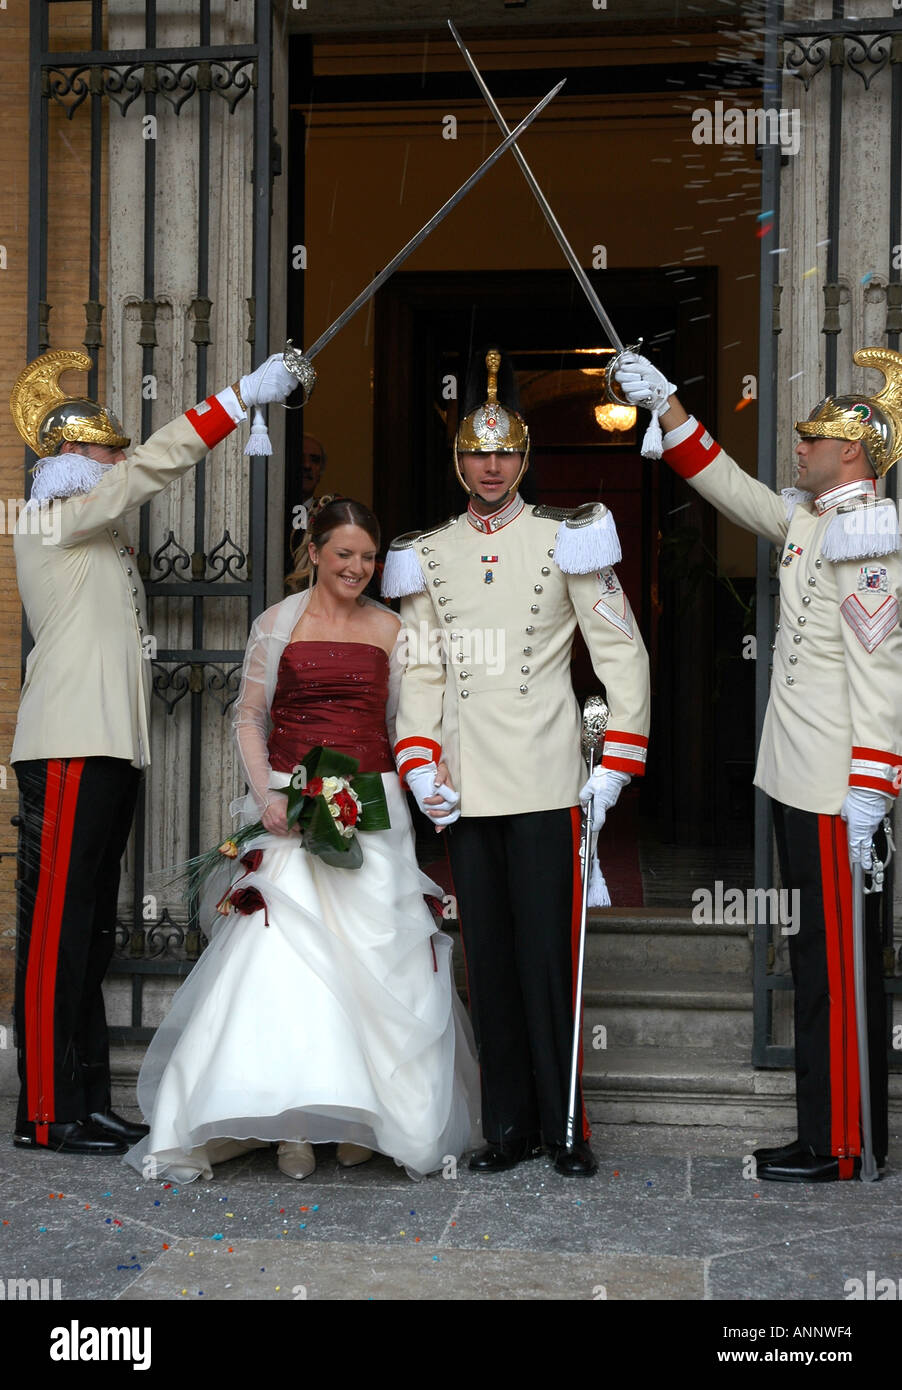 In Rome crossed swords and full dress uniforms mark the Campidoglio wedding of a Presidential guardsman and his bride Stock Photo